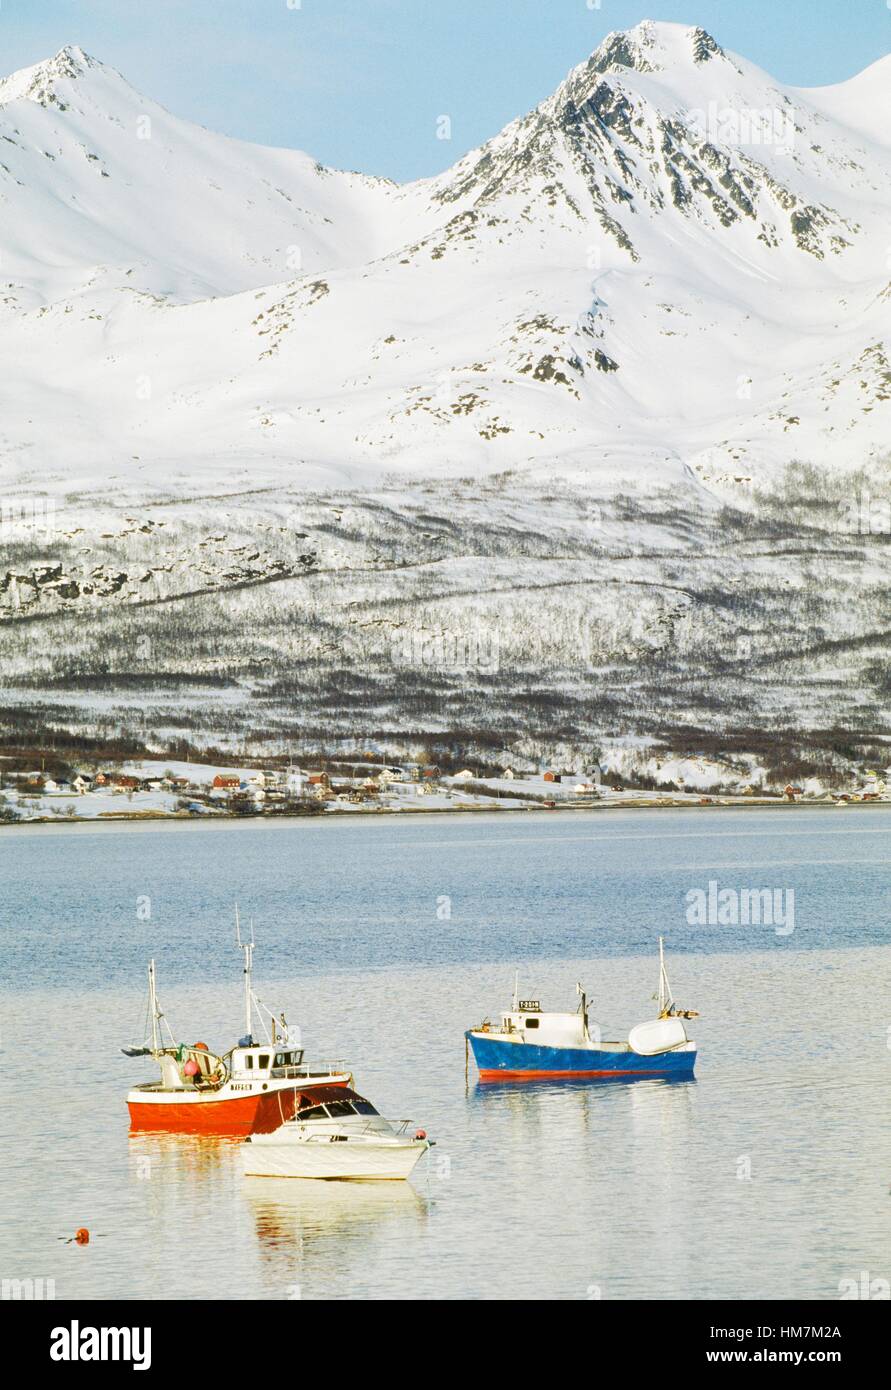 Boats in the Reisafjord, Troms county, Norway. Stock Photo